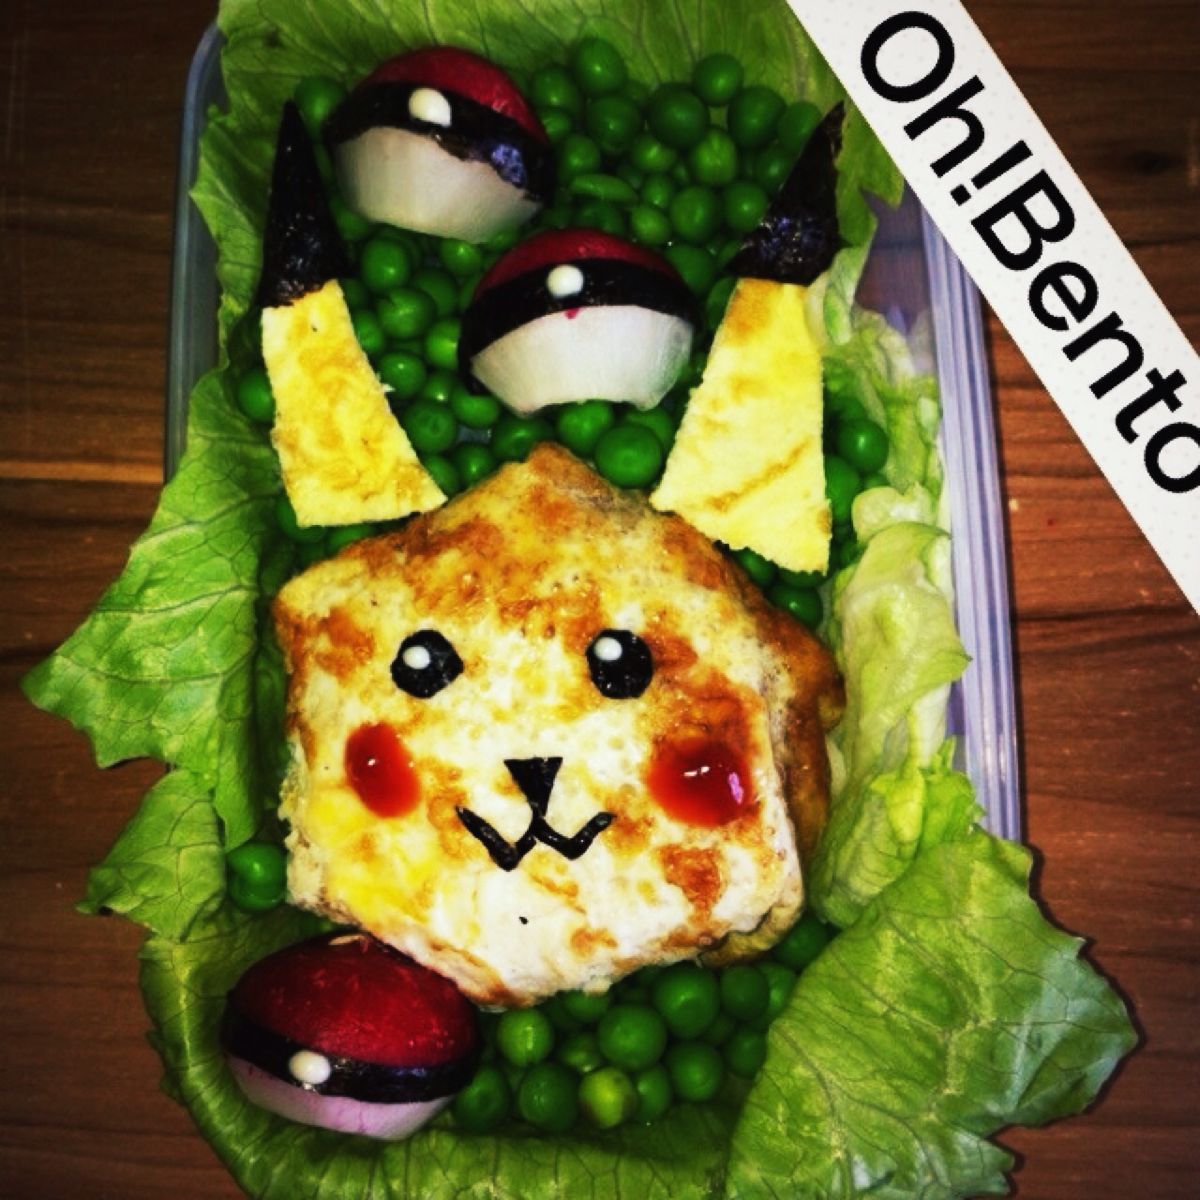 http://www.pearltrees.com/s/pic/or/pikachu-omurice-bento-35237474